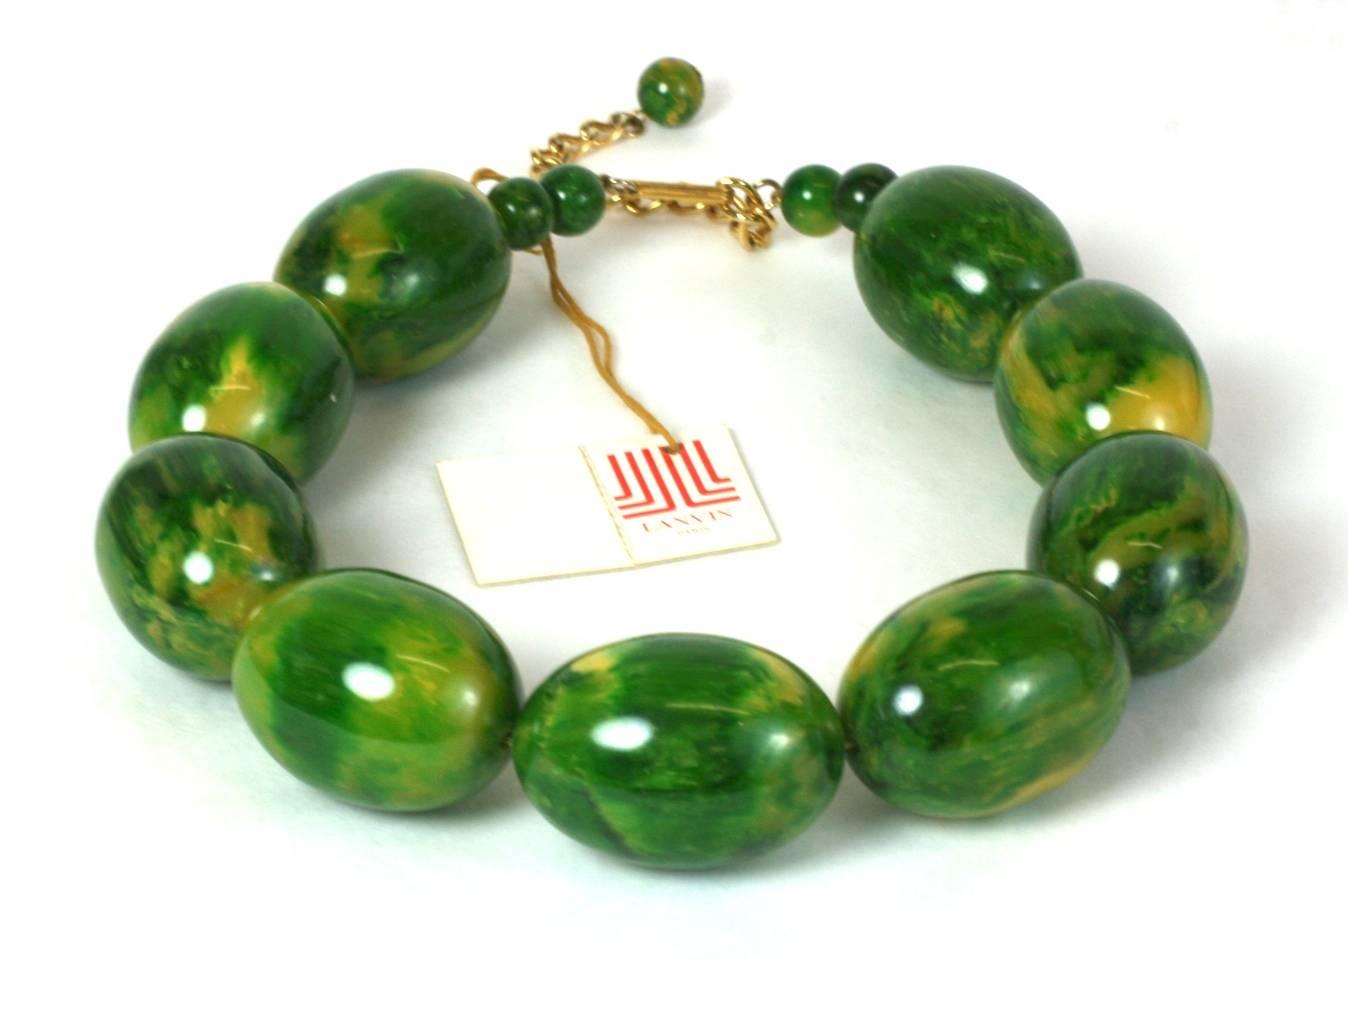 Lanvin End of Day Green Bakelite Beads from the 1970's. Oversized mottled green bakelite egg shaped beads are used for this imposing necklace. 
Retains original paper label. 1970's France.
Excellent condition. 
Adjusts from 16" to 19",